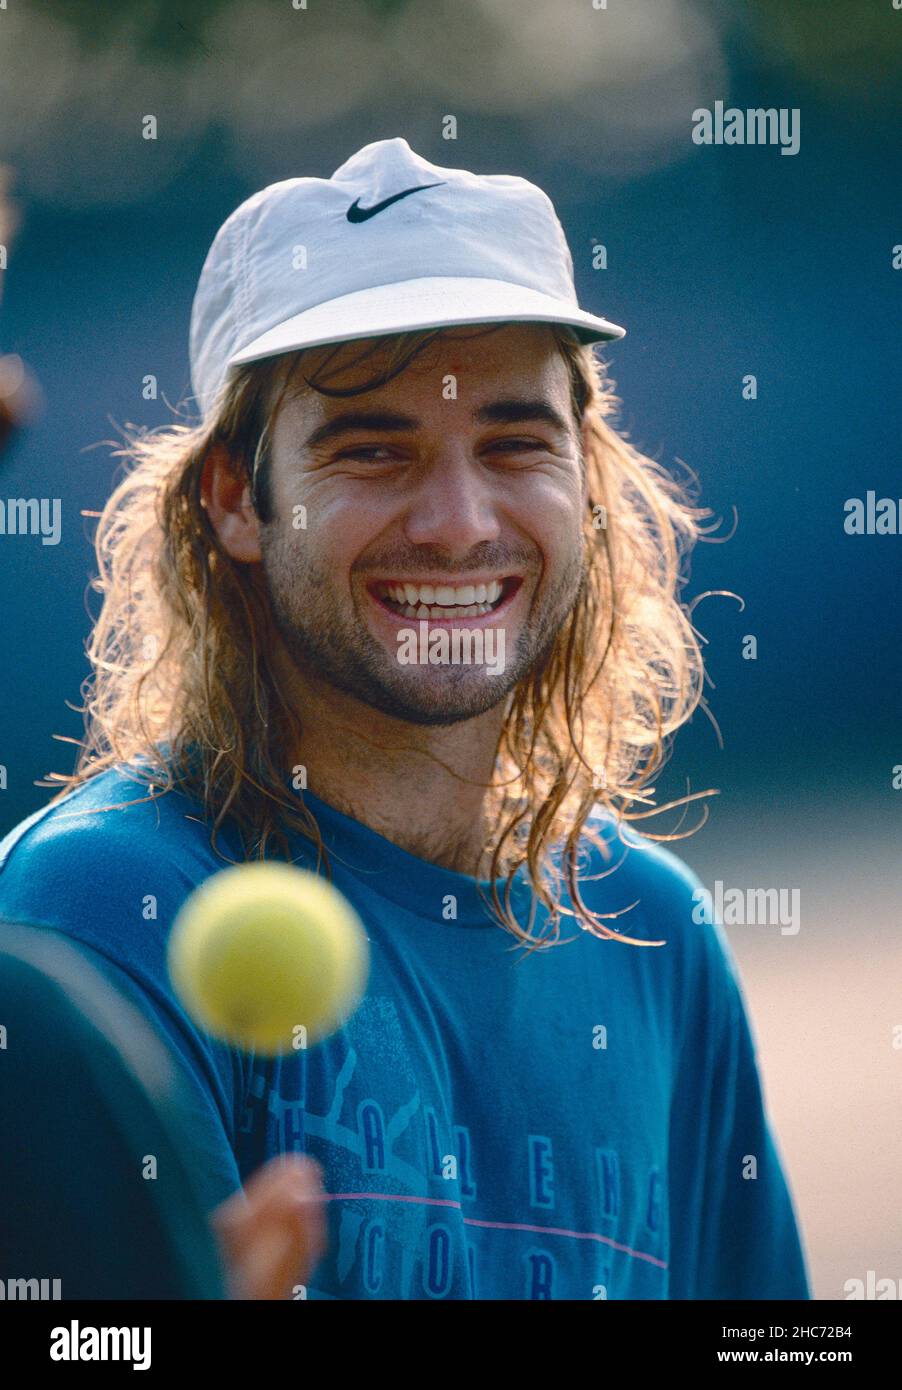 American tennis player Andre Agassi, US Open 1993 Stock Photo - Alamy